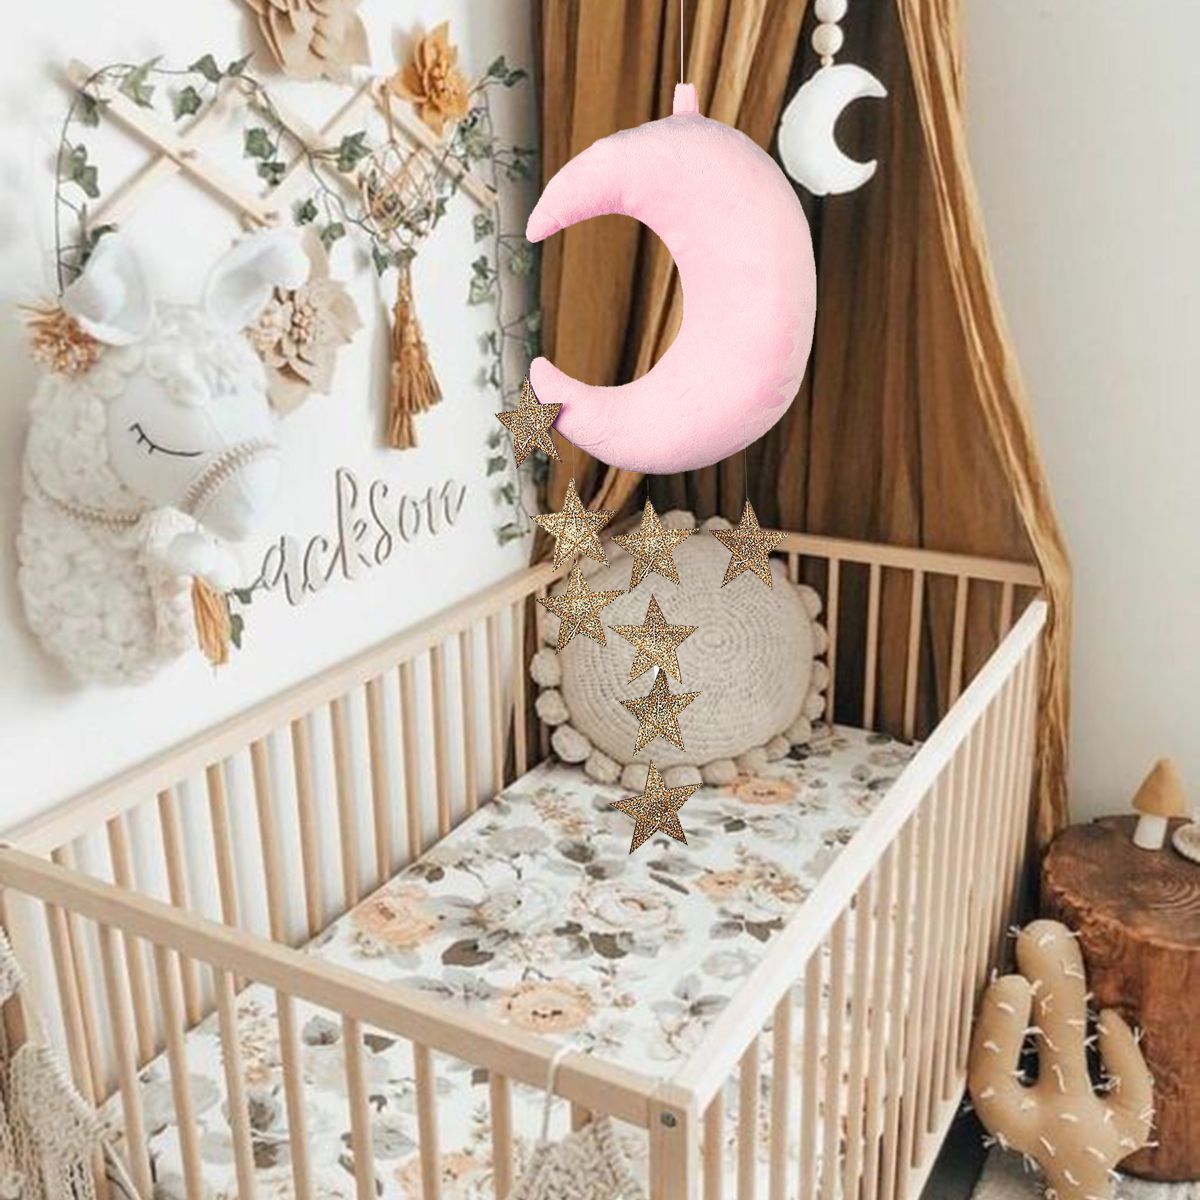 White-Pink-Moon-Cloud-And-Star-Baby-Bed-Hanging-Room-Decorations-Accessories-Nursery-Decor-Drop-1490560